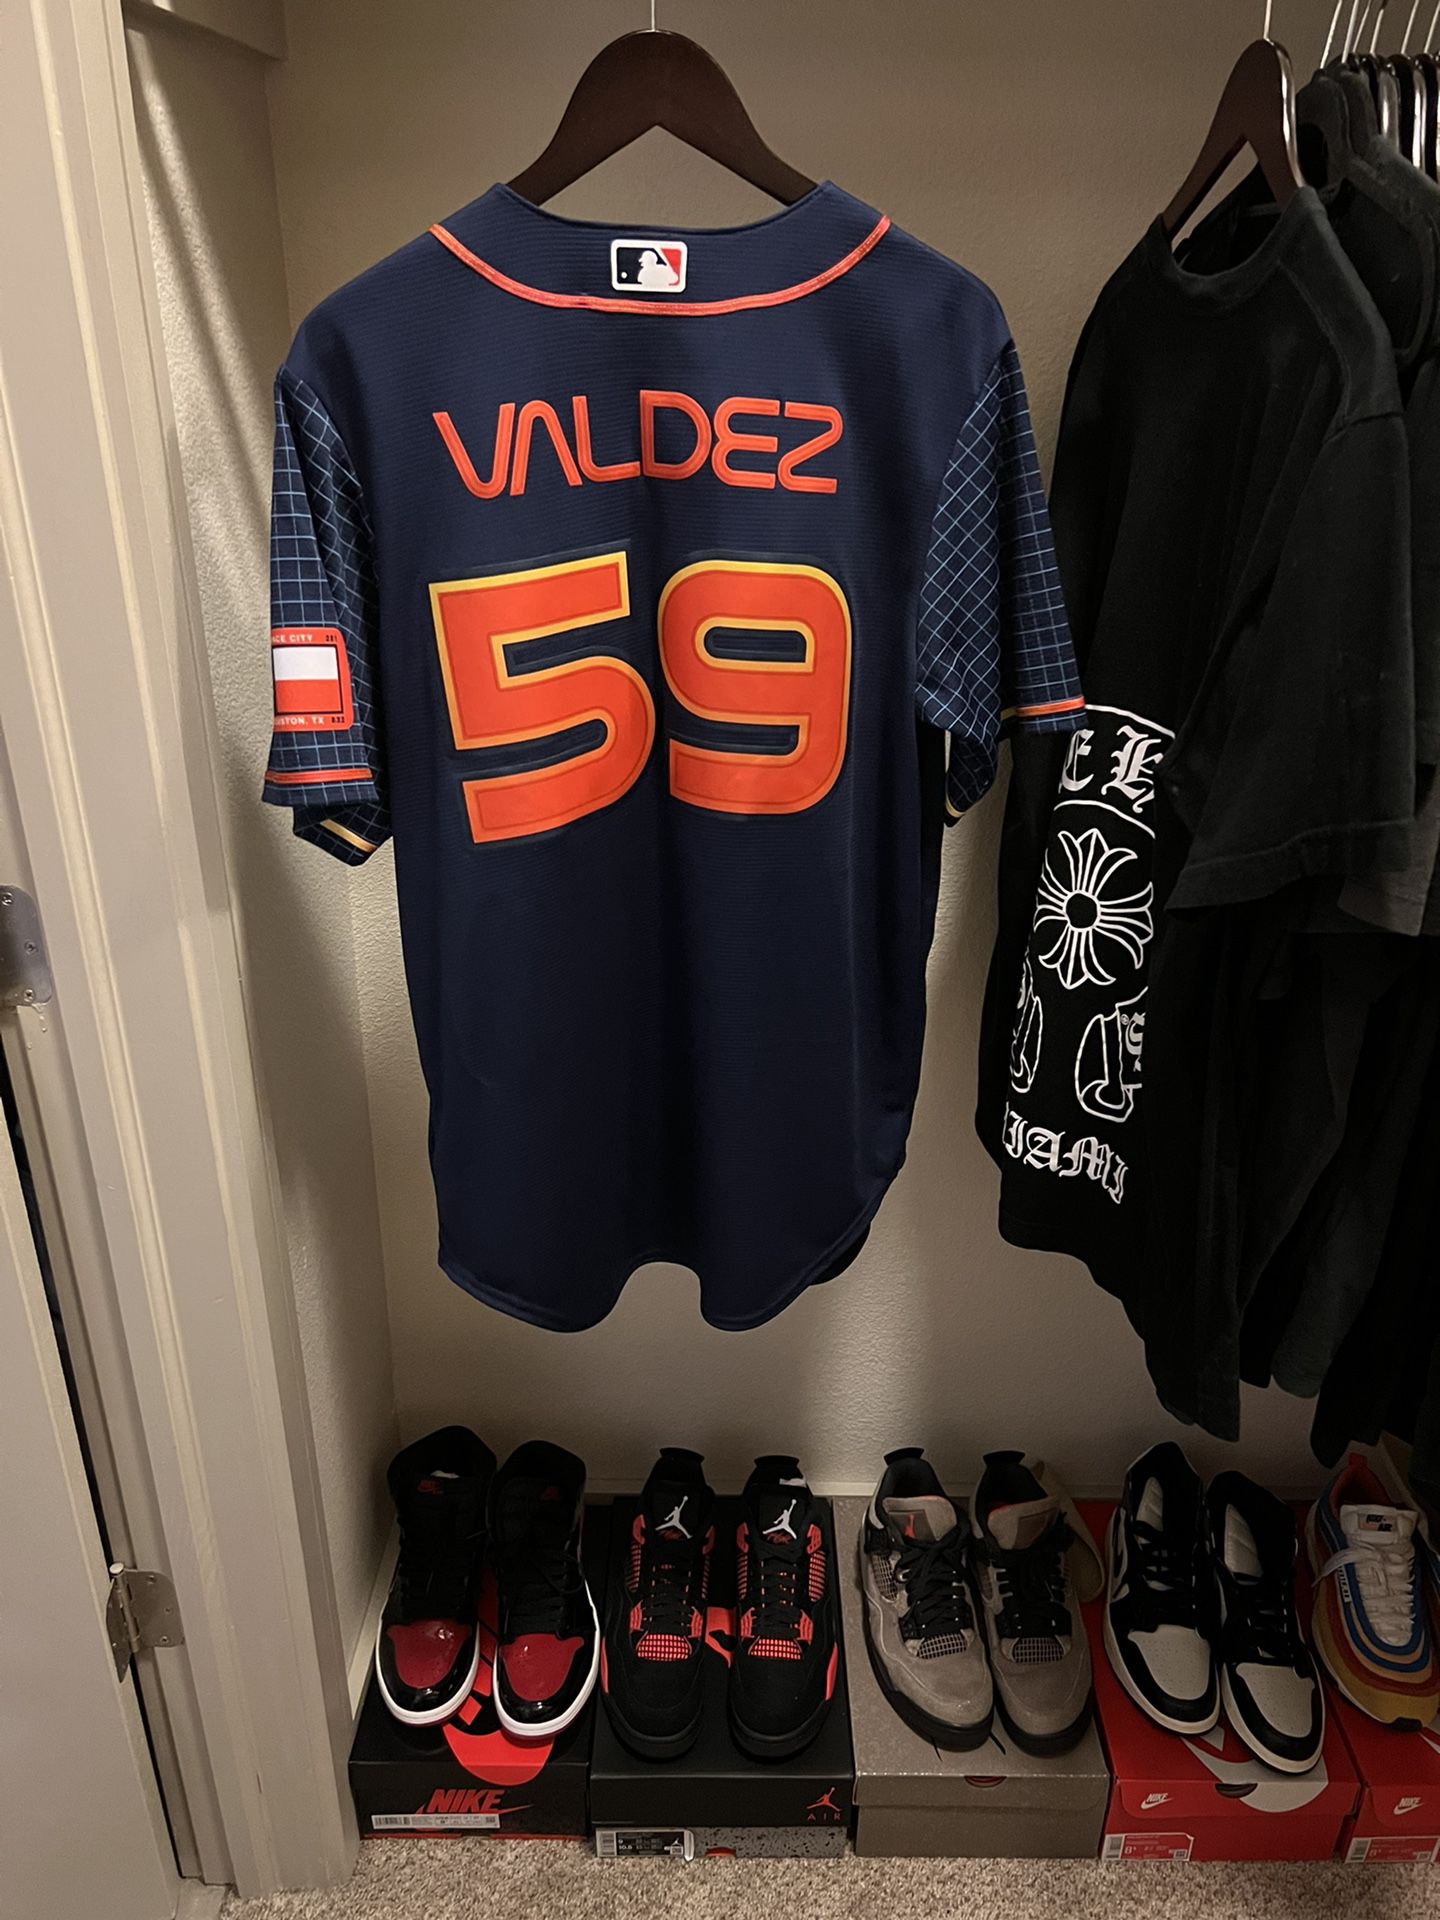 NEW SPACE CITY ASTROS JERSEY for Sale in Shenandoah, TX - OfferUp